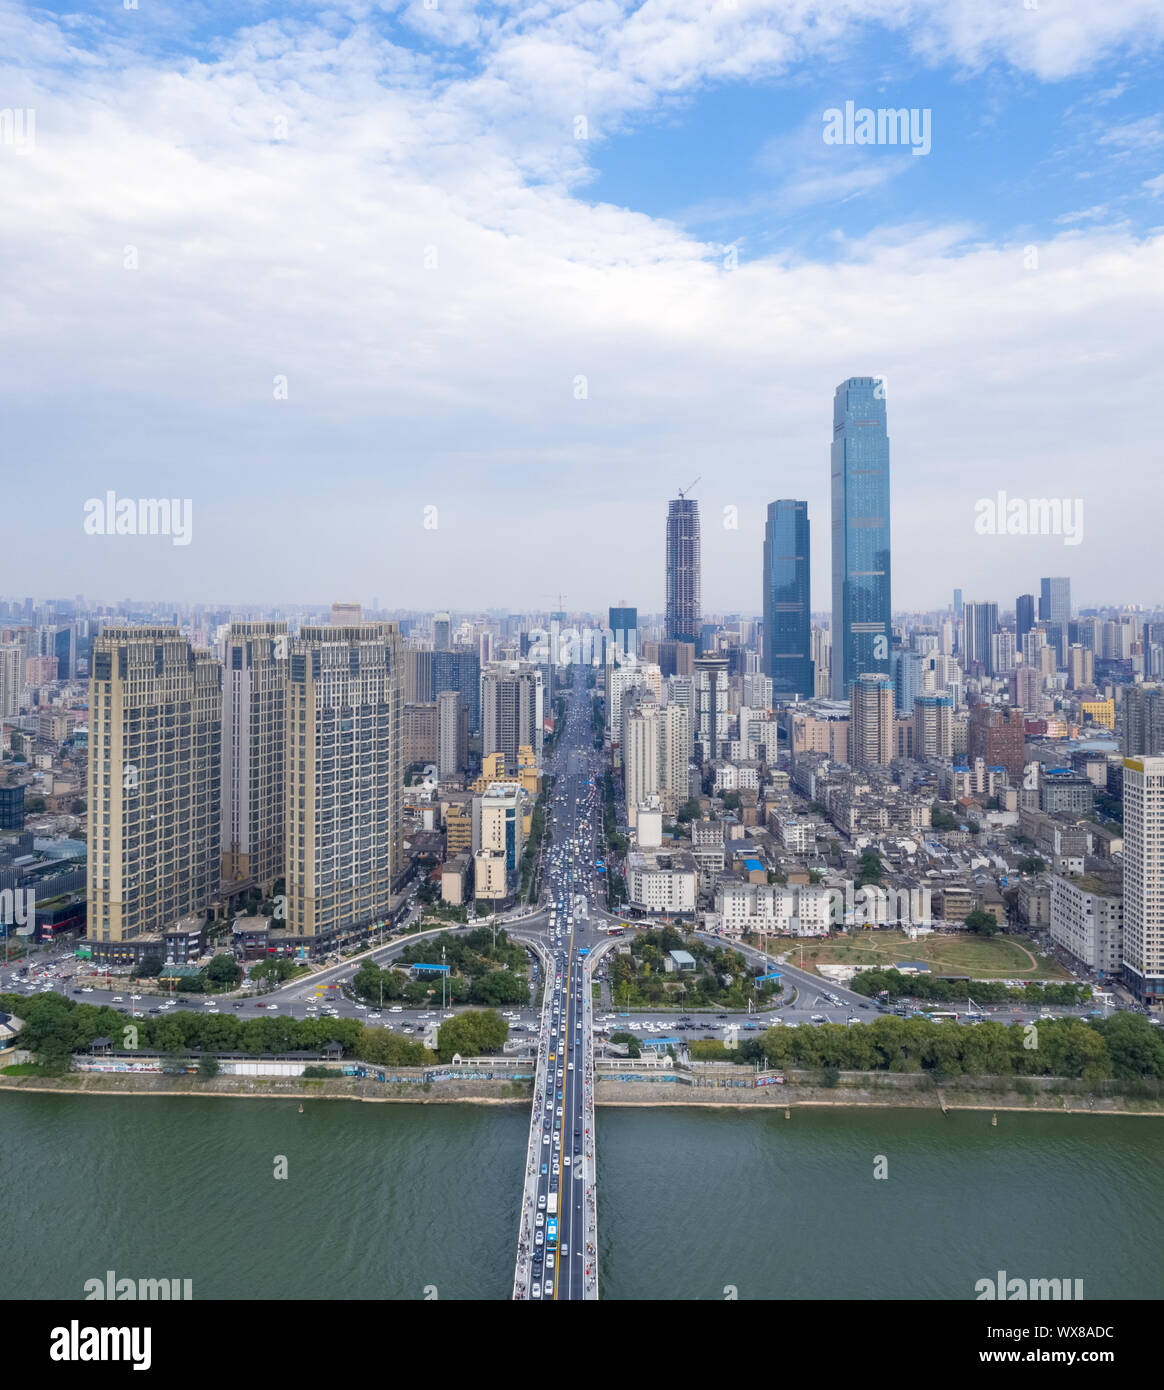 aerial view of modern changsha Stock Photo